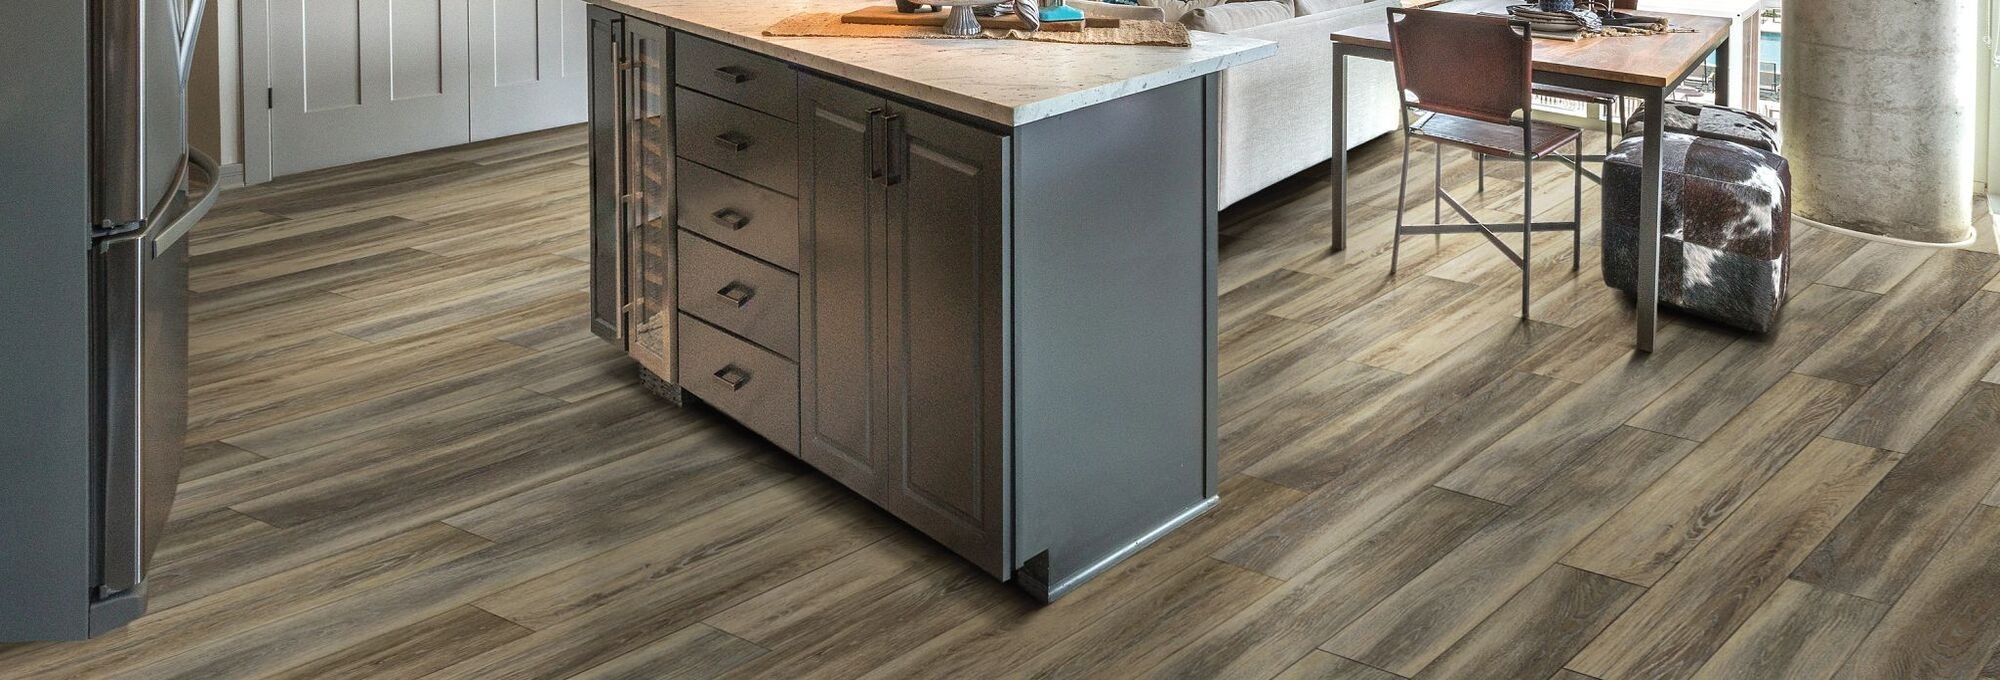 Kitchen furniture on hardwood - Casual Carpets in Springfield, MO